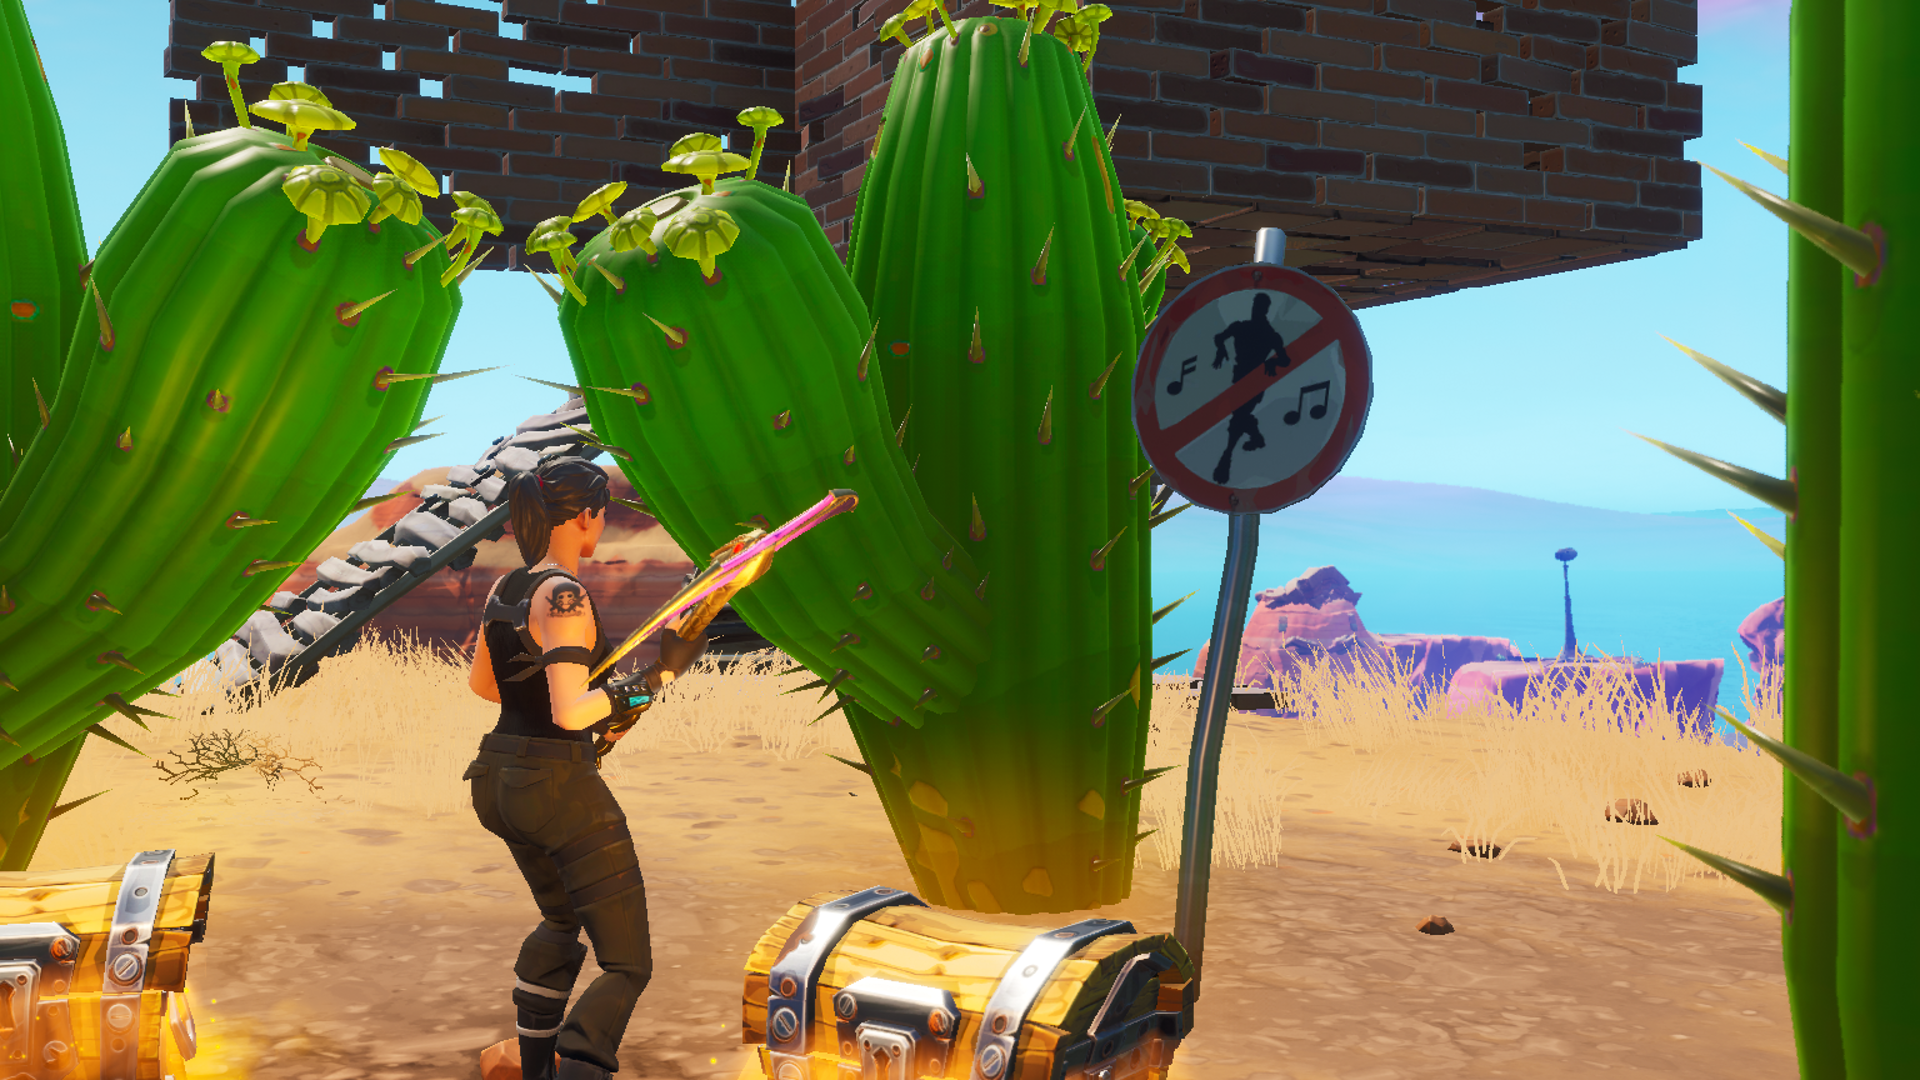 A Fortnite player standing in front of a no dancing sign